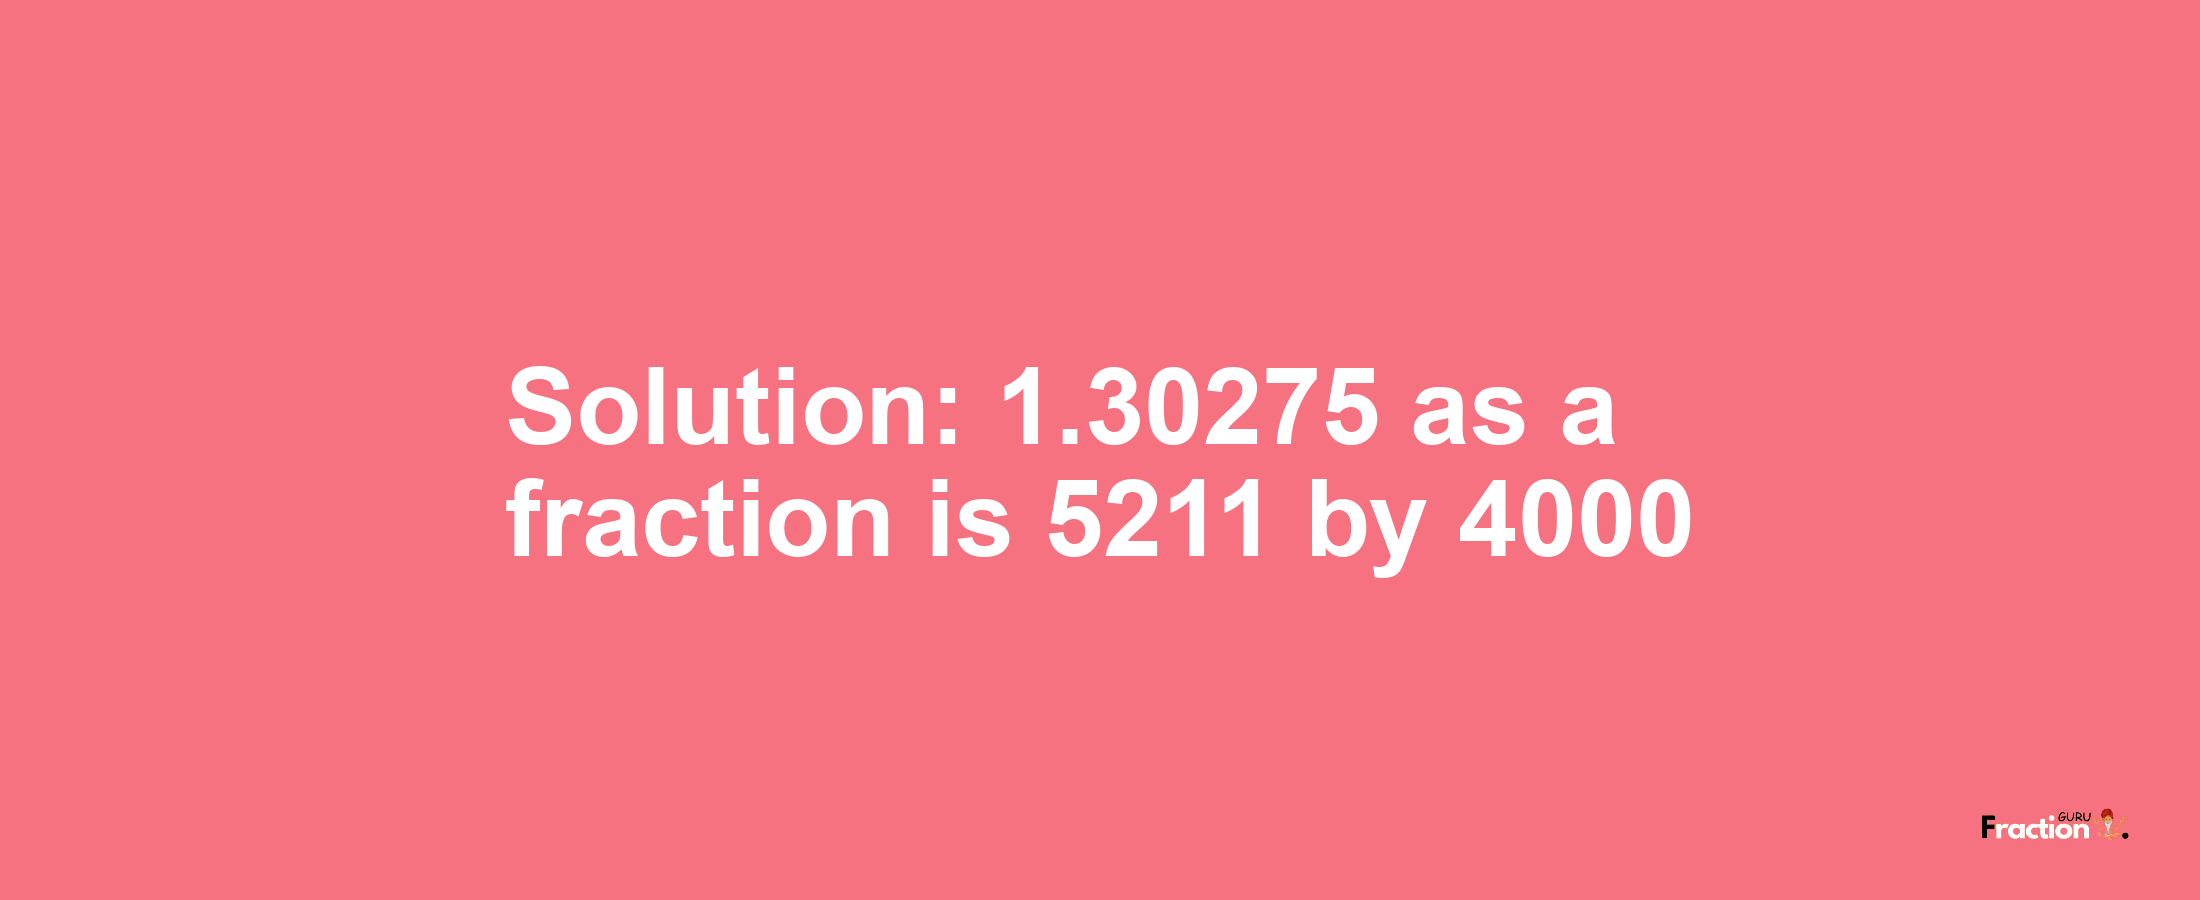 Solution:1.30275 as a fraction is 5211/4000